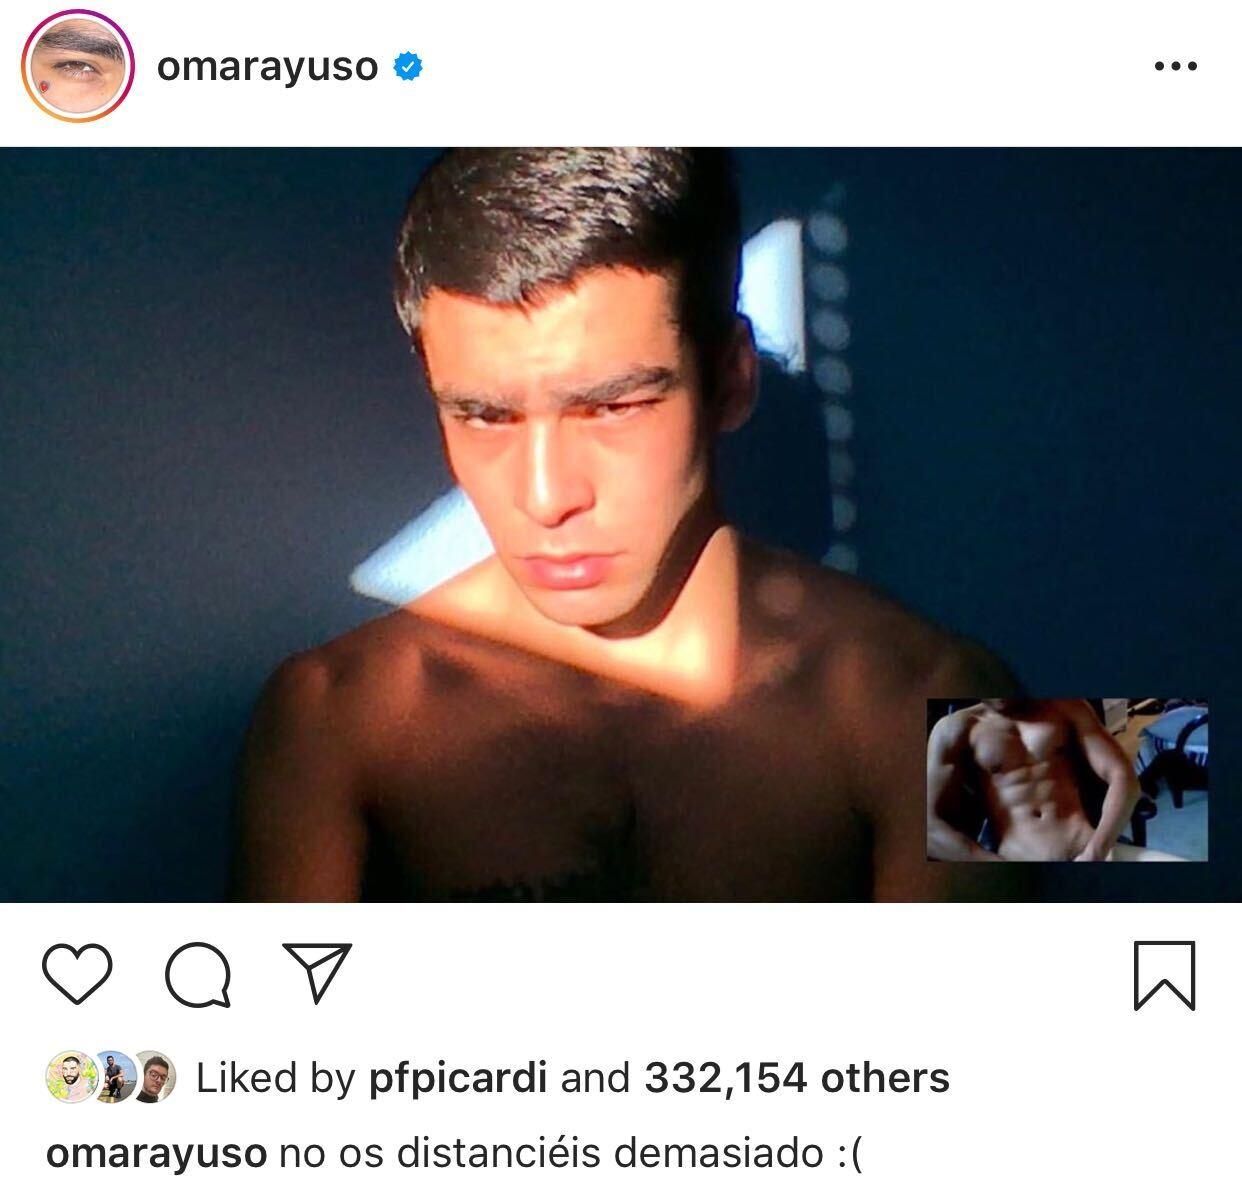 Omar Ayuso's Photo With a Nude Guy Was Censored by Instagram.